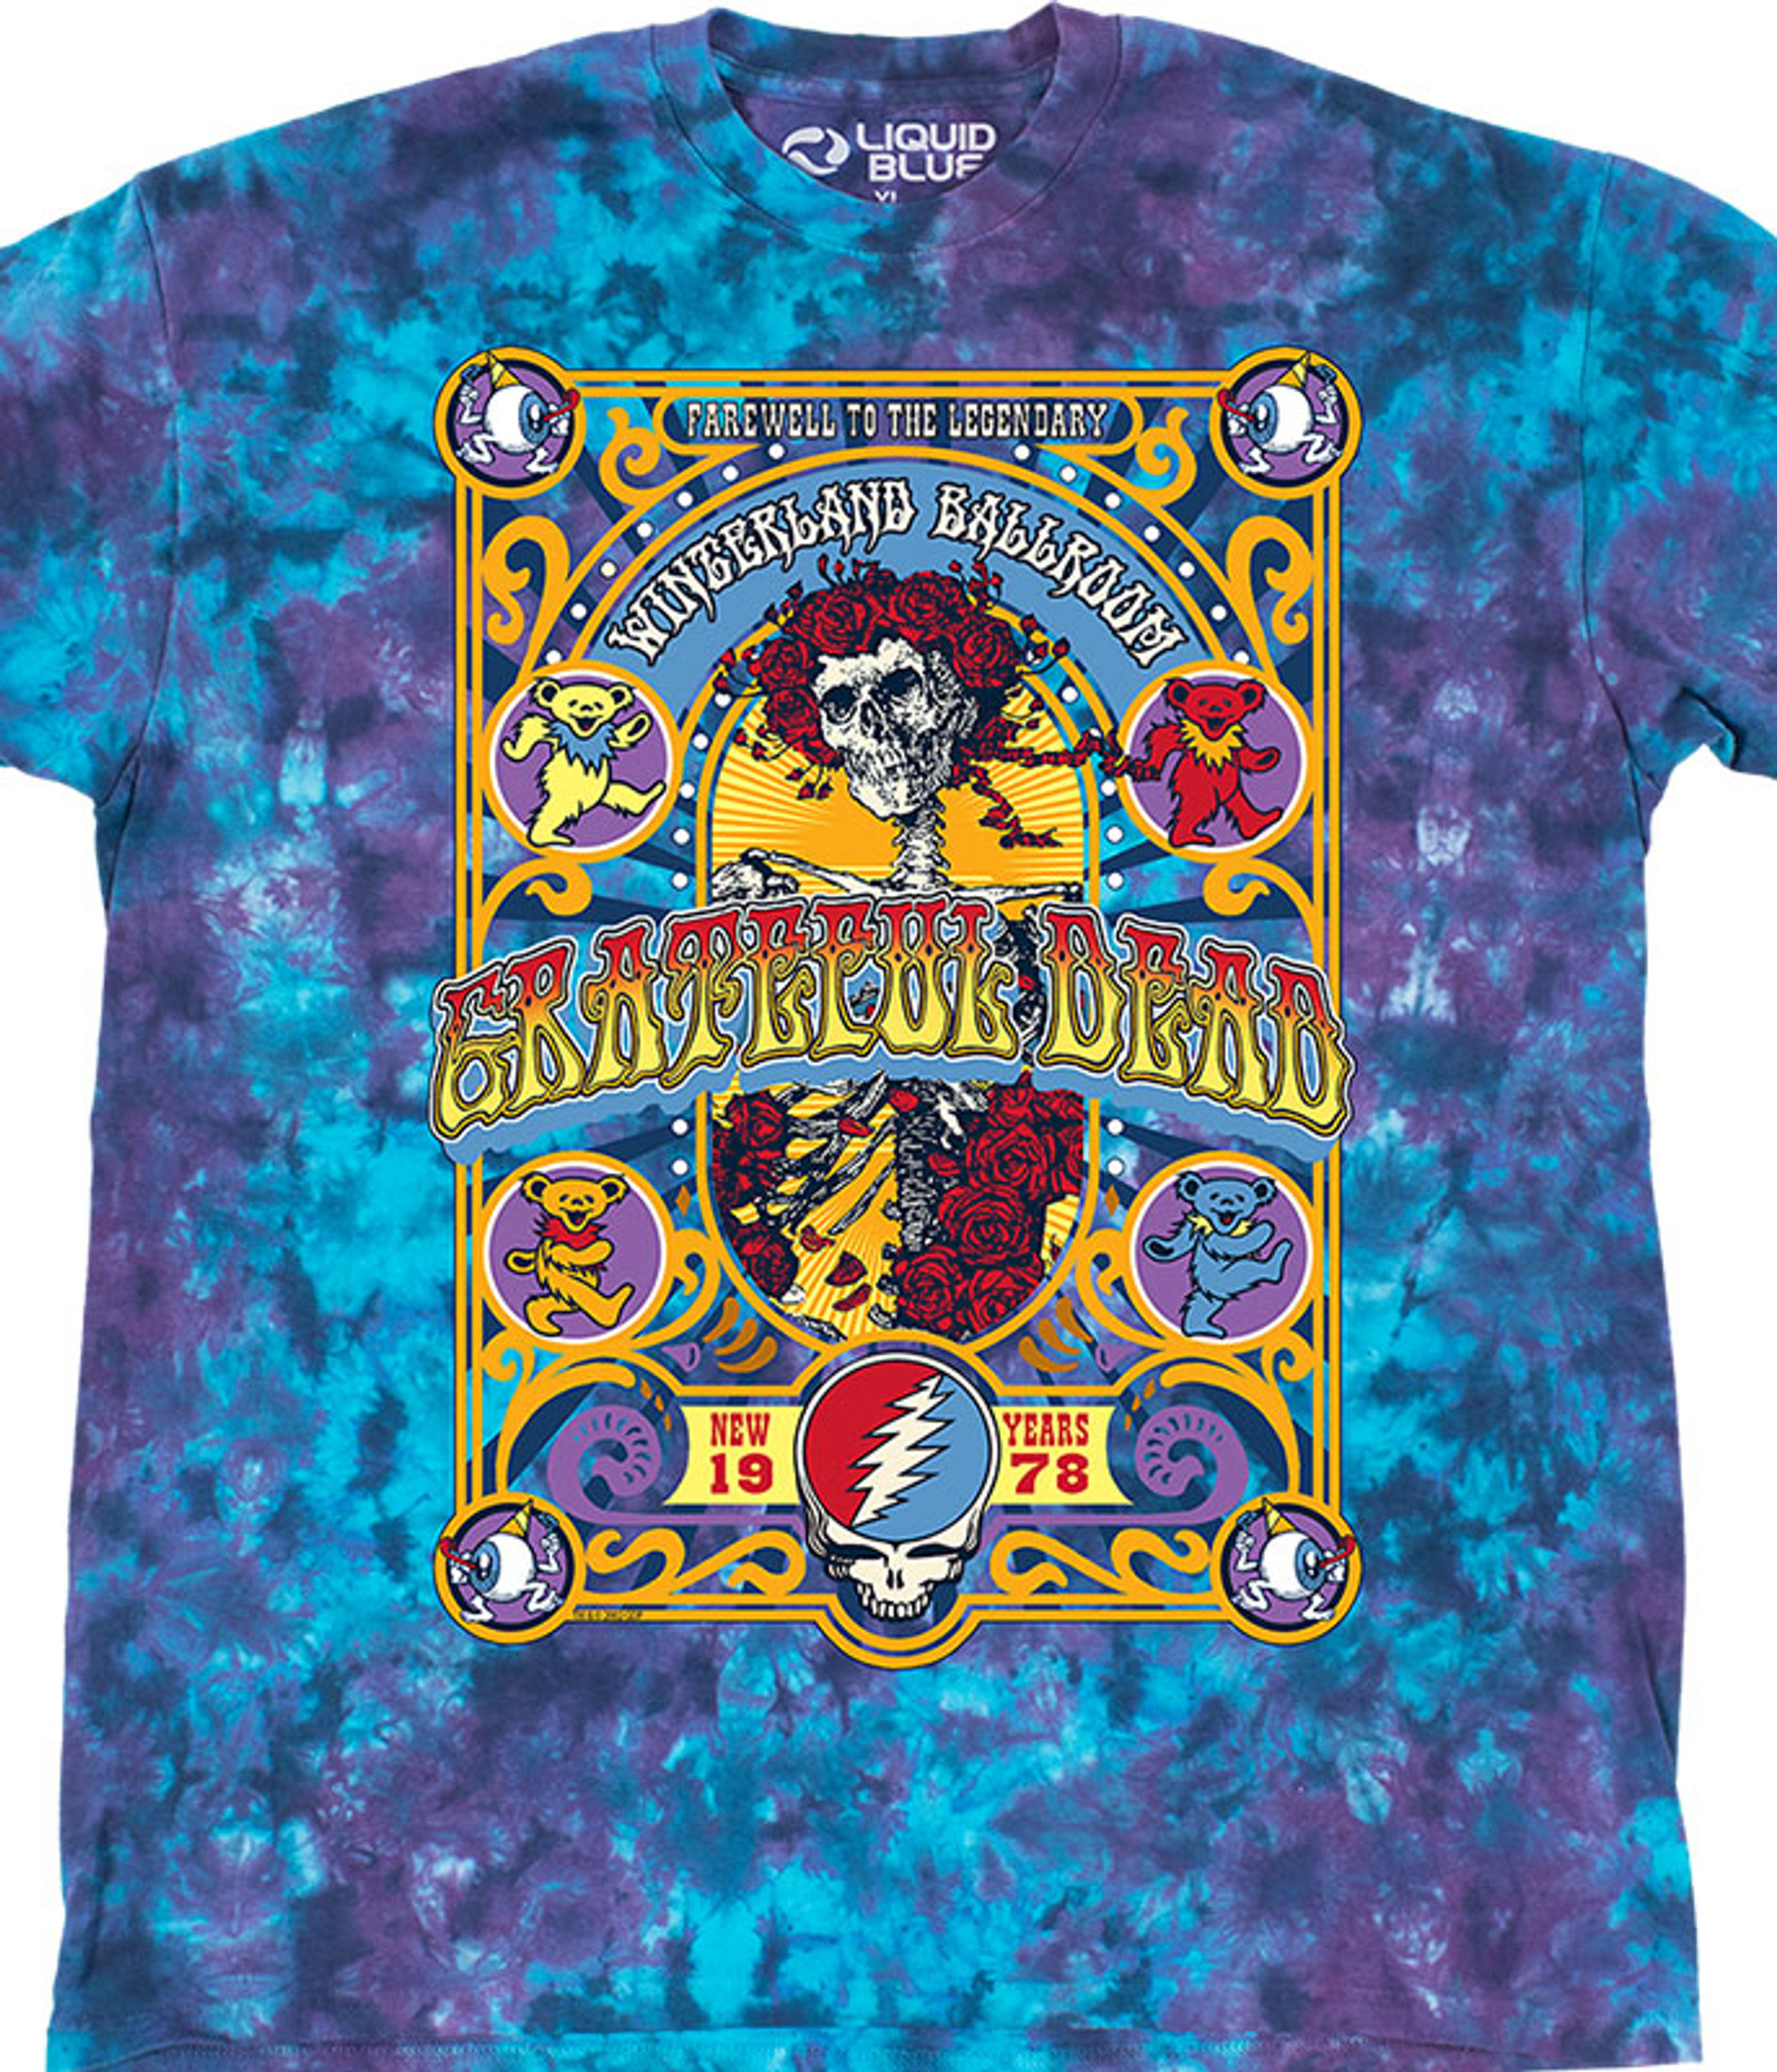 MLB x Grateful Dead x Giants T-Shirt from Homage. | Grey | Vintage Apparel from Homage.